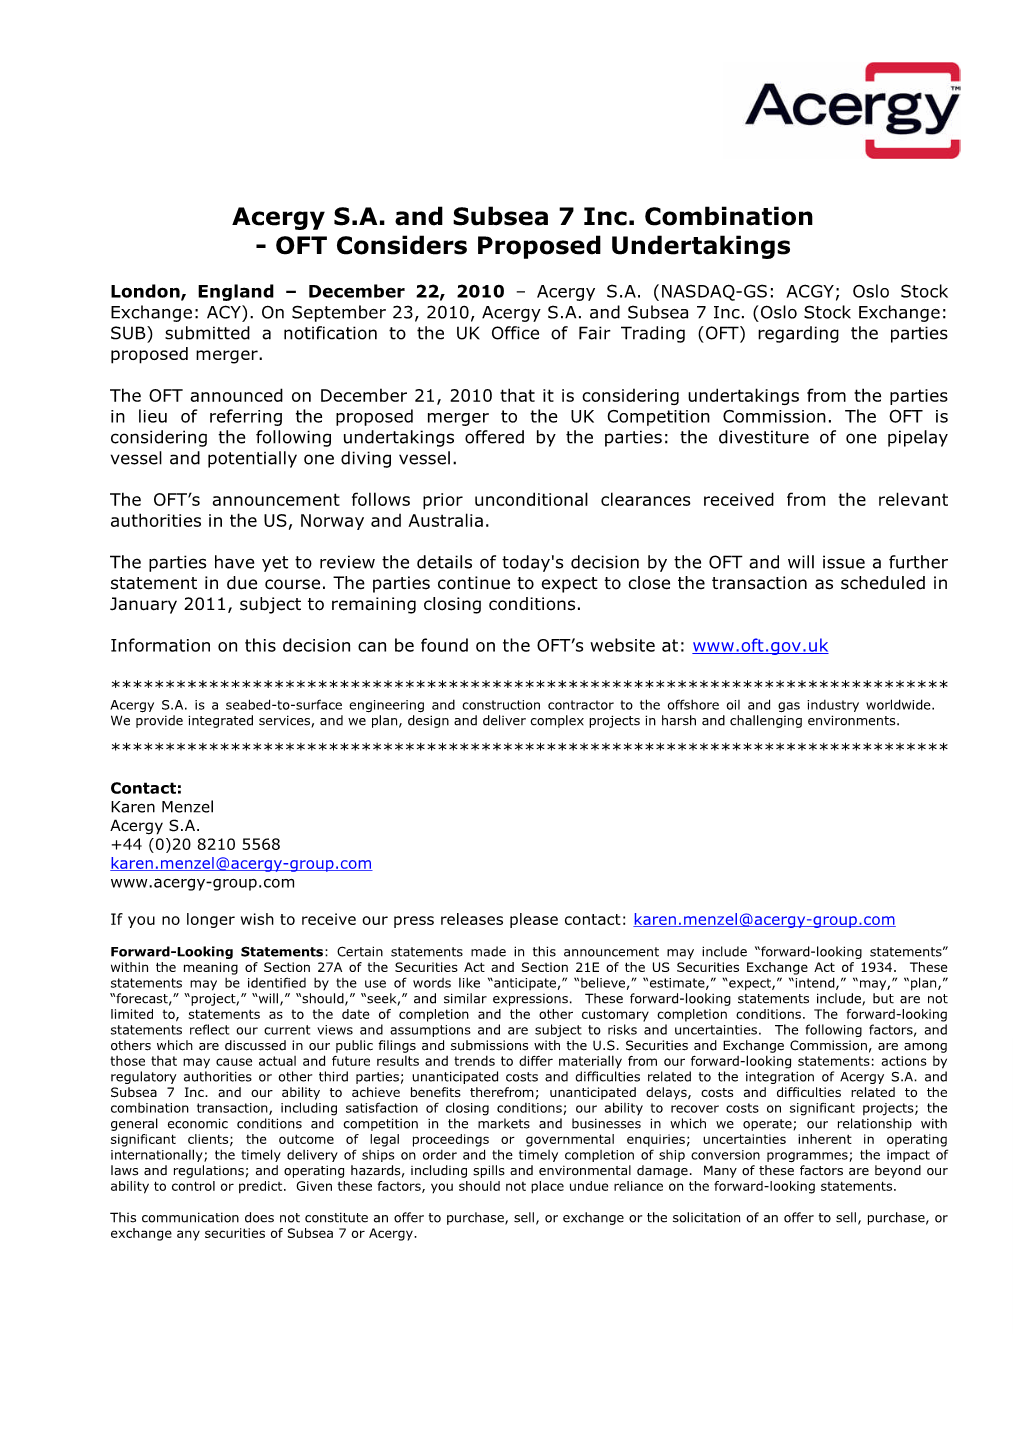 Acergy S.A. and Subsea 7 Inc. Combination - OFT Considers Proposed Undertakings